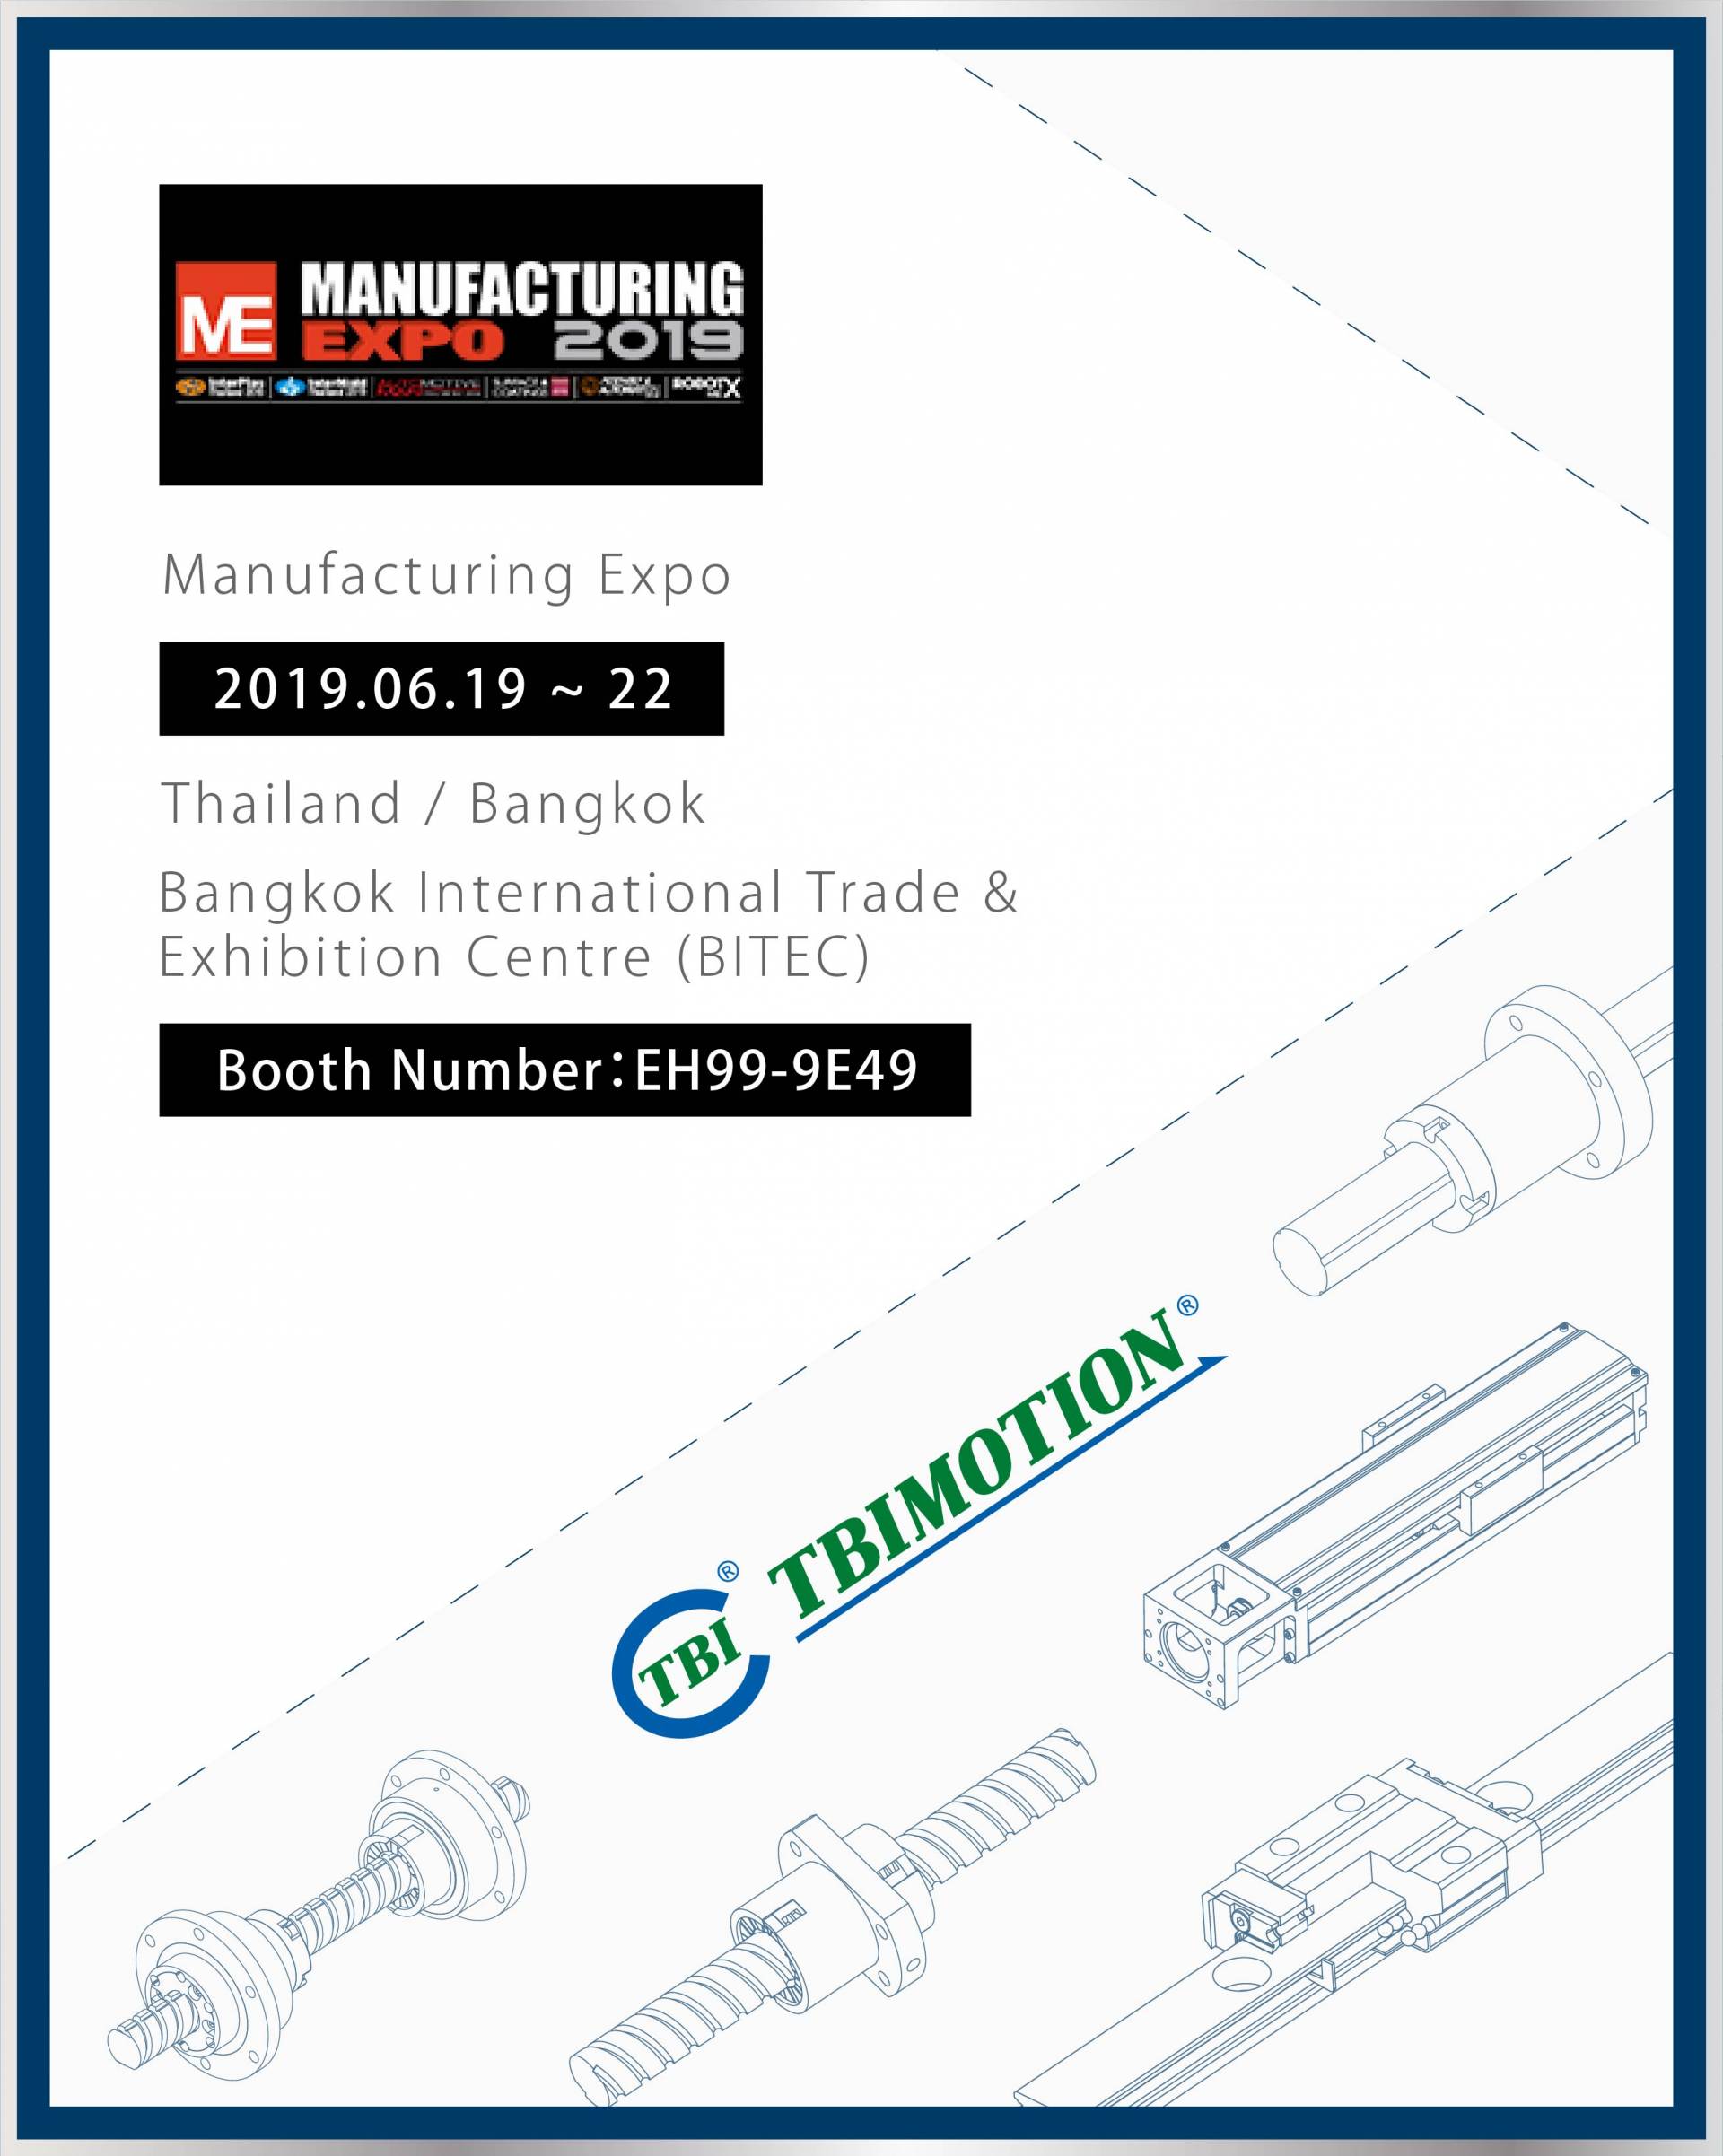  Manufacturing Expo